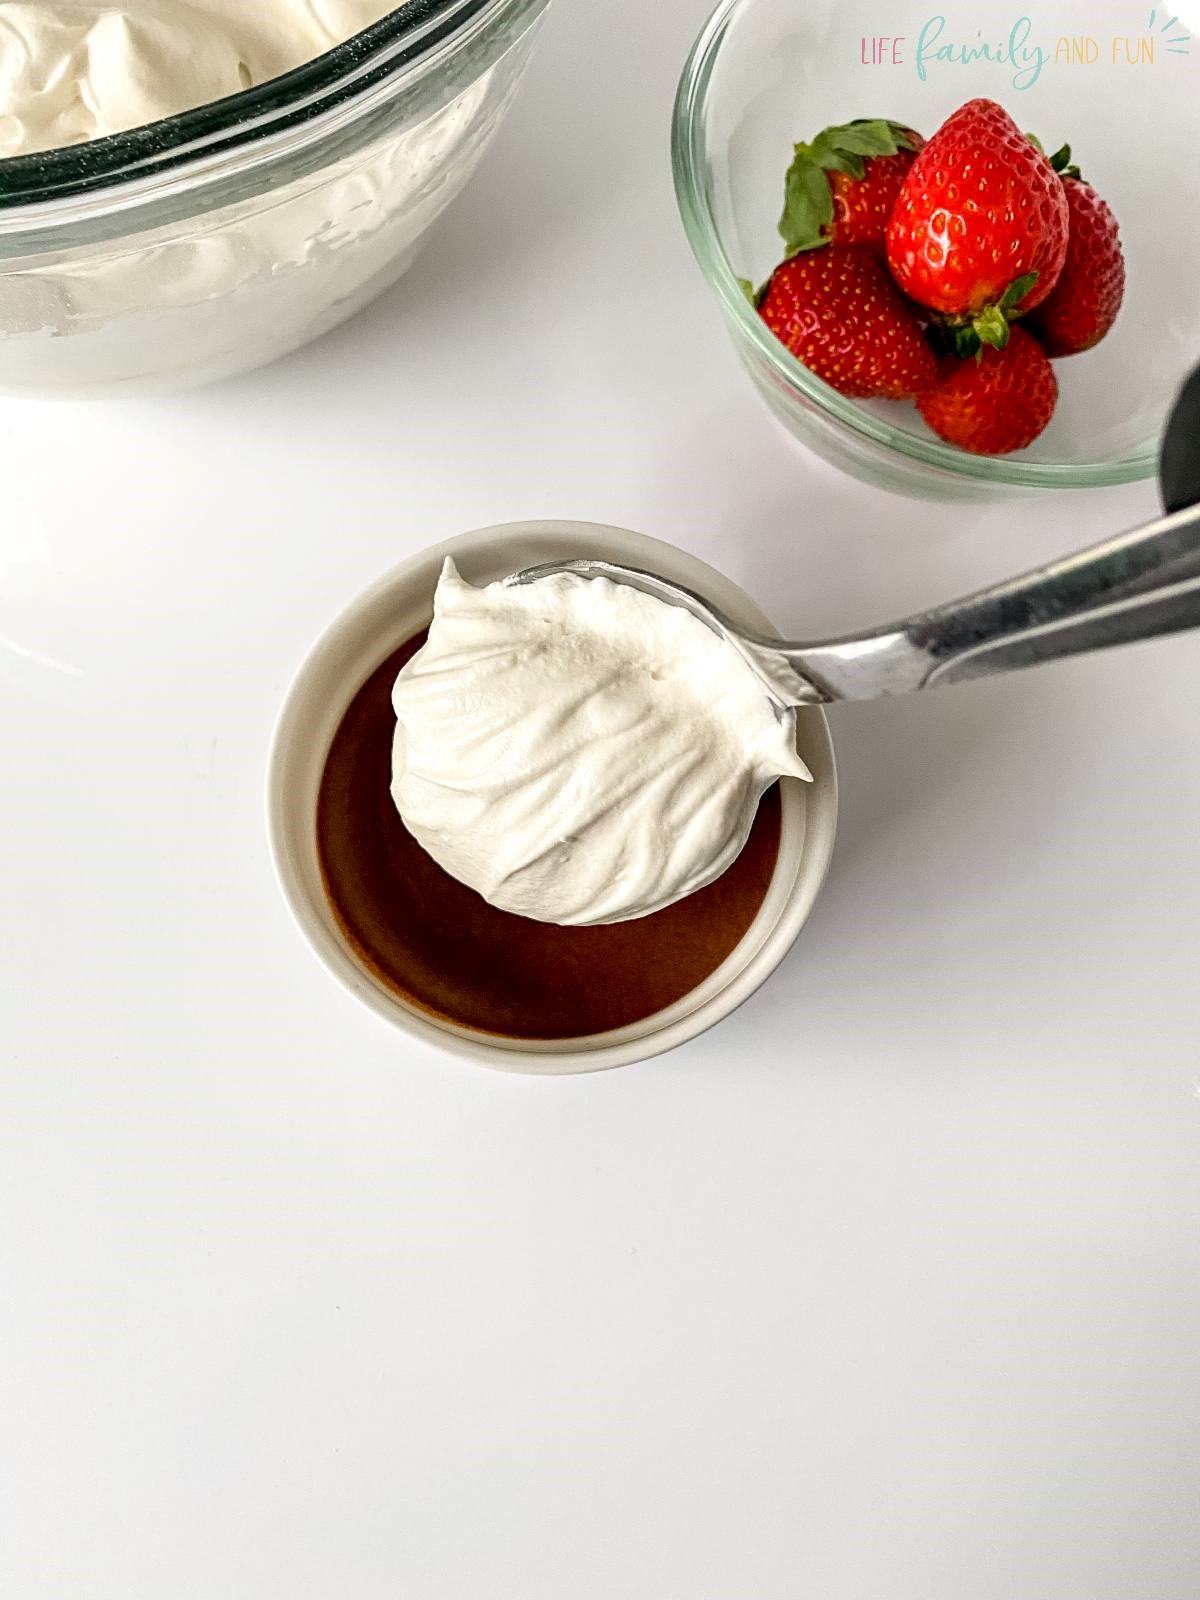 Homemade whipped cream - INGREDIENTS - prepare